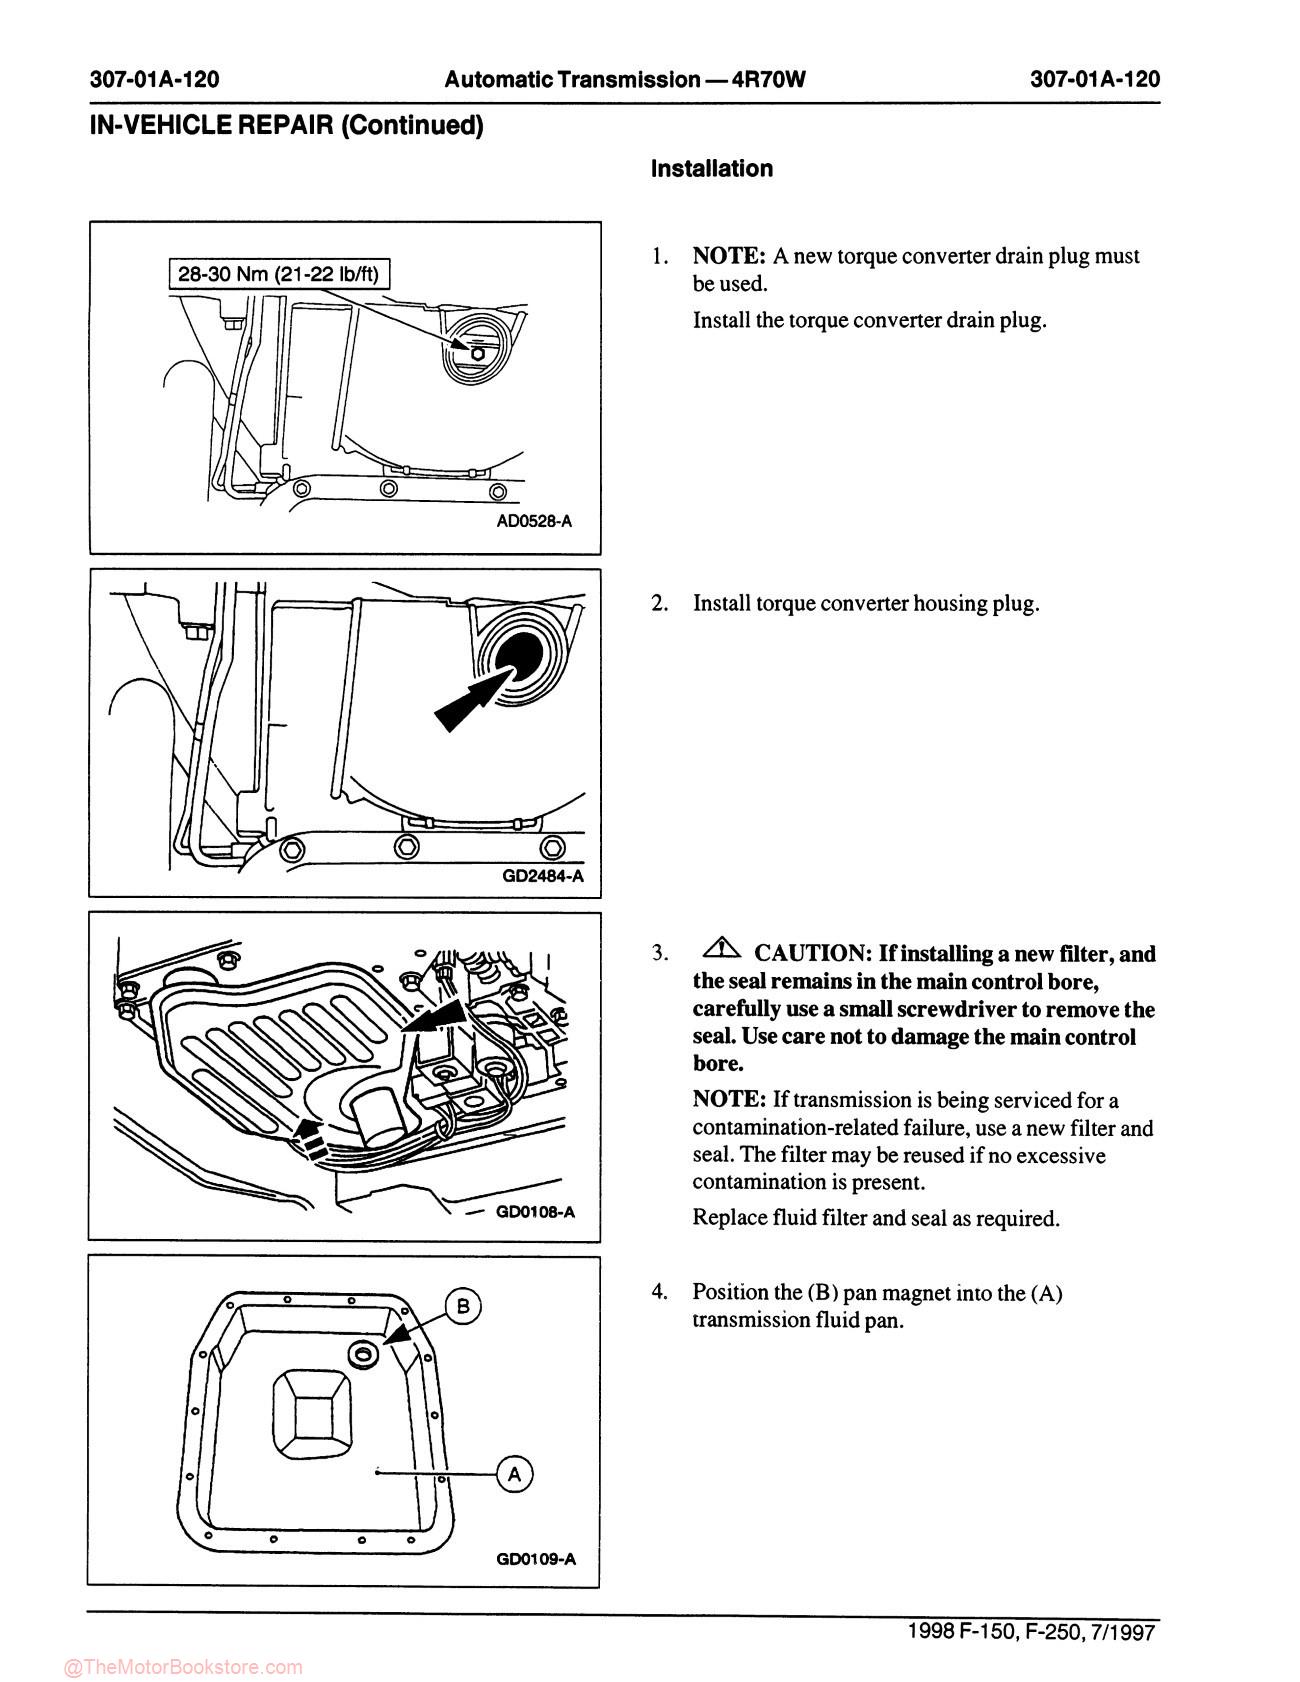 1998 Ford F-150, F-250 Truck Workshop Manual - Sample Page 5